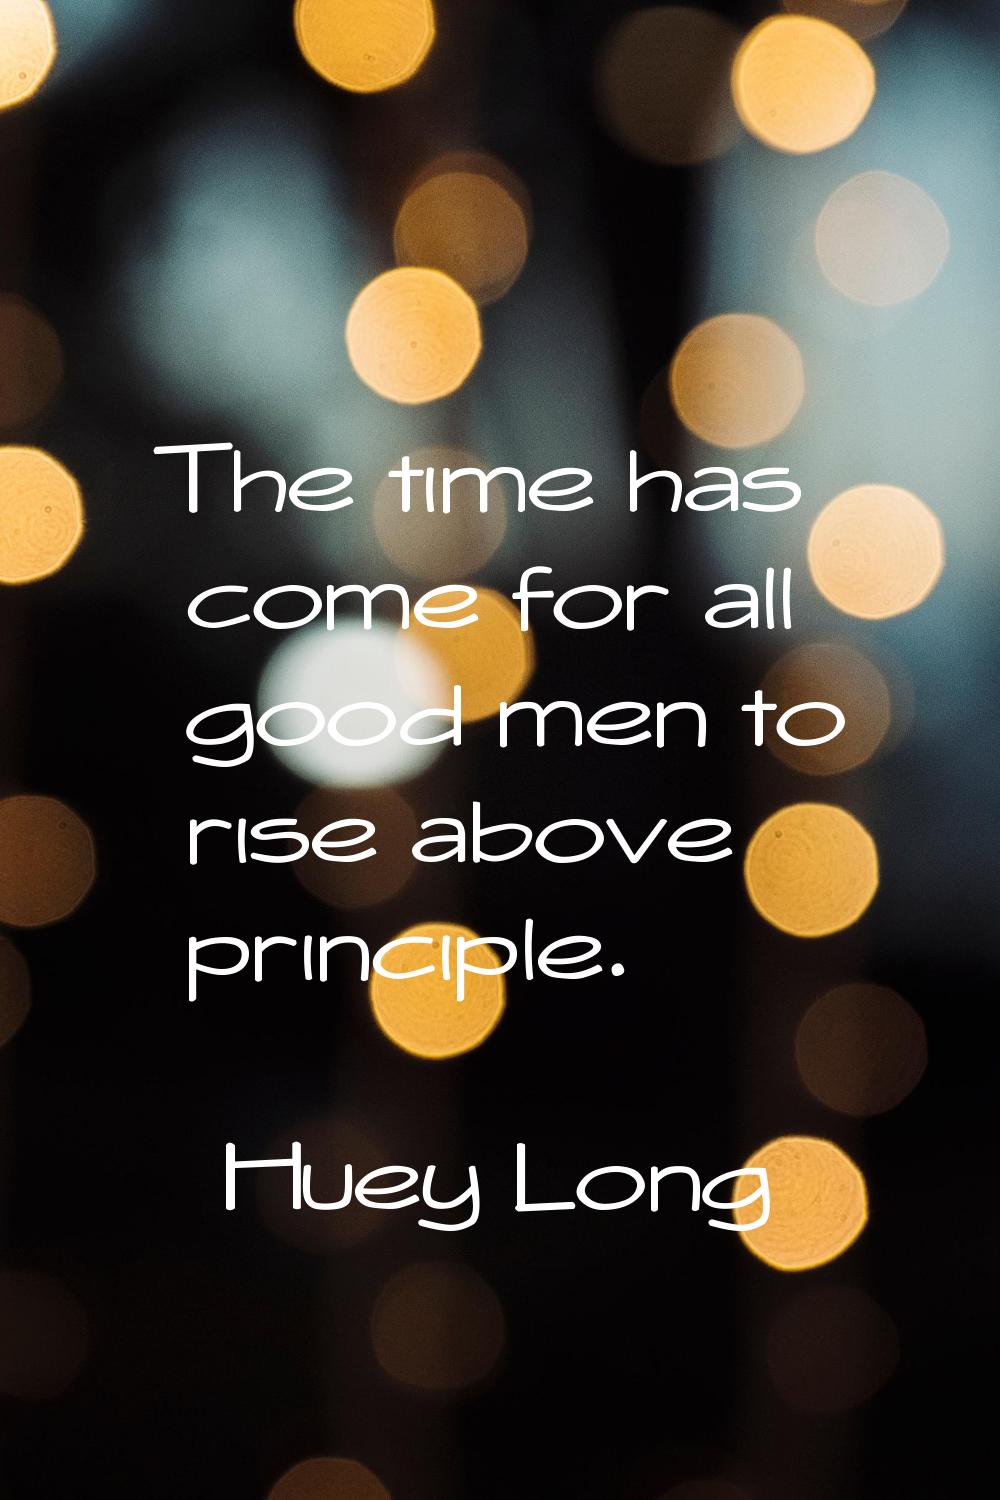 The time has come for all good men to rise above principle.